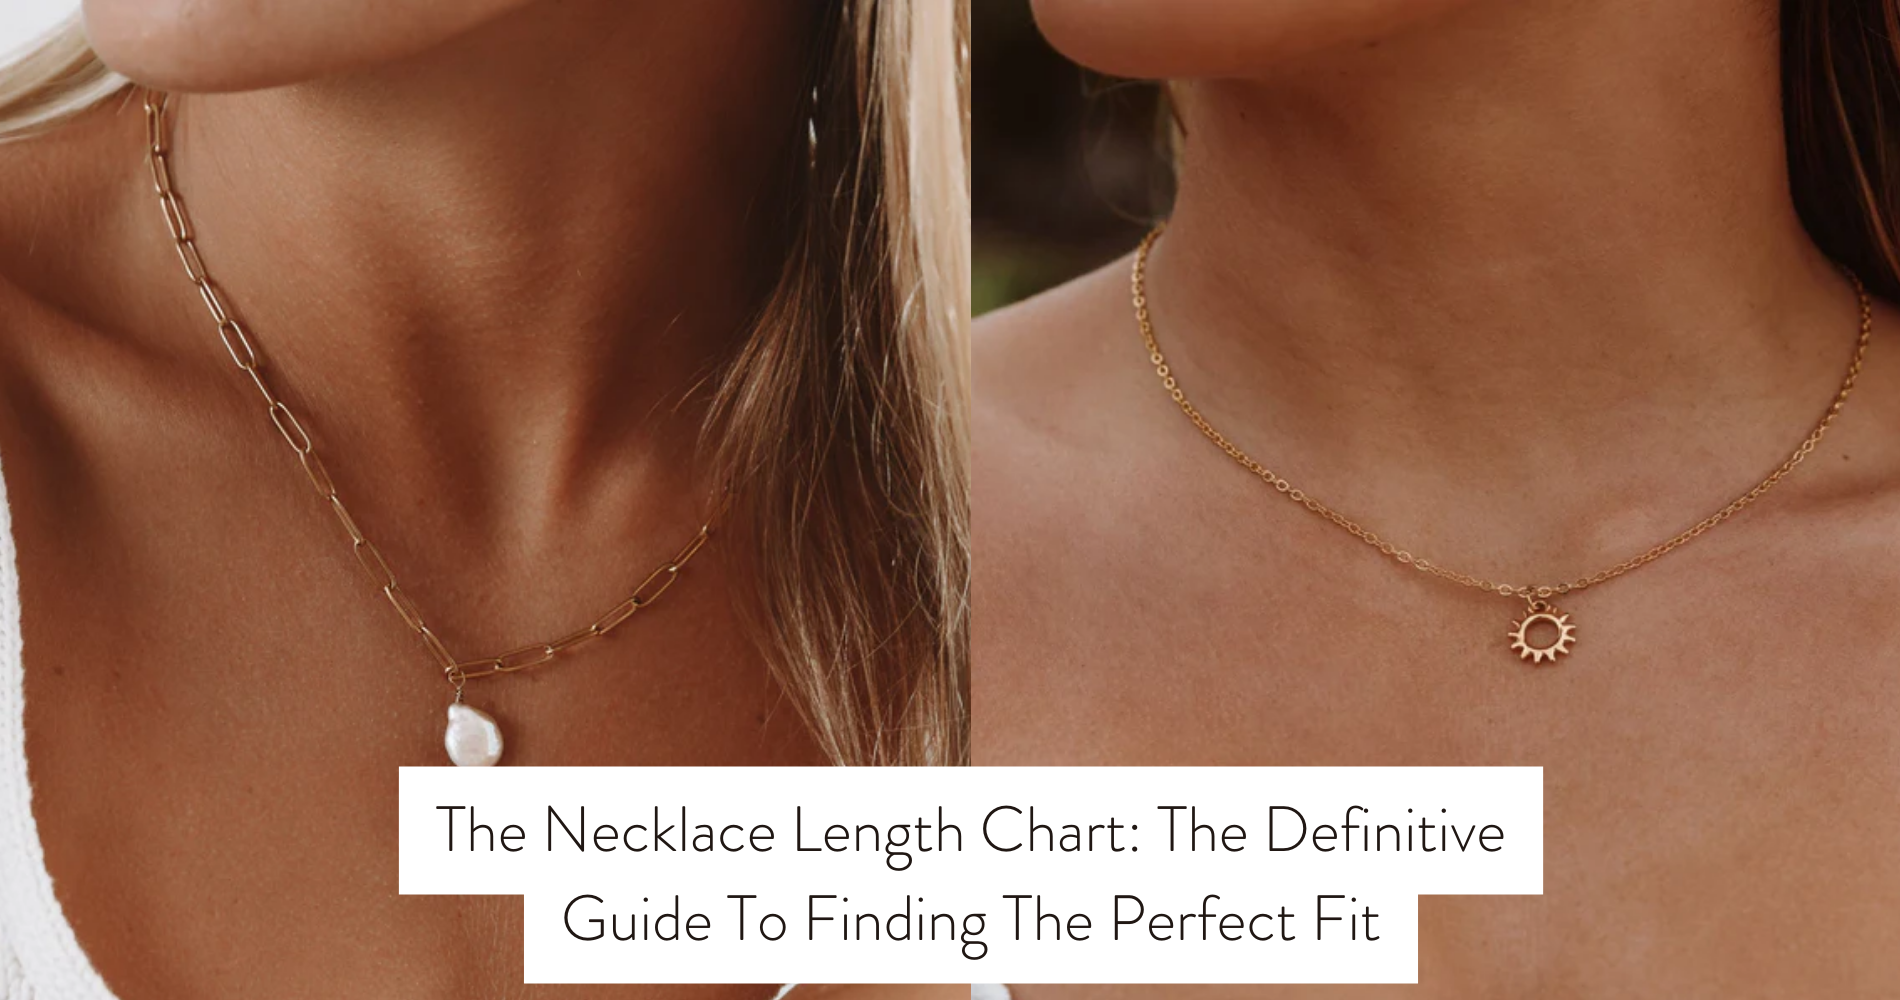 The Necklace Length Chart: The Definitive Guide To Finding The Perfect